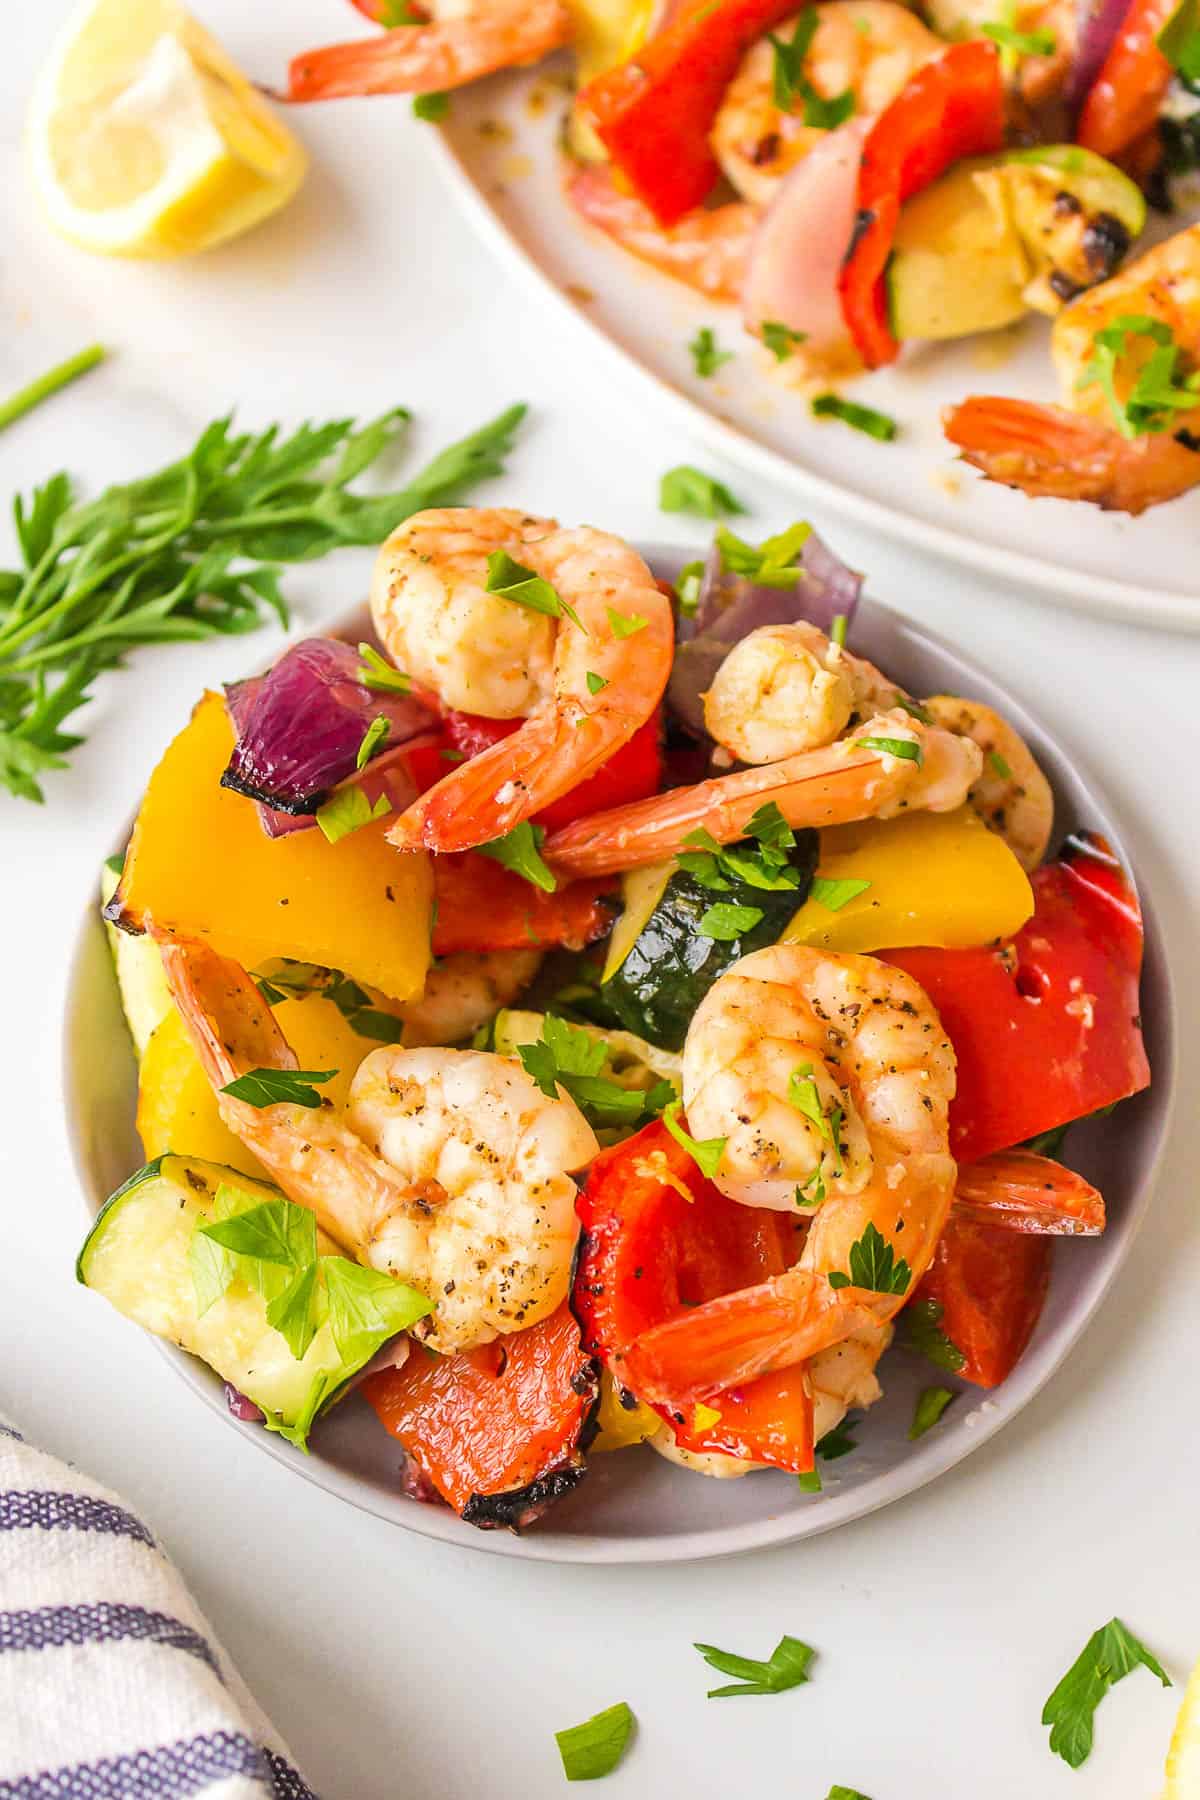 Shrimp and veggies removed from a skewer and onto a plate. 